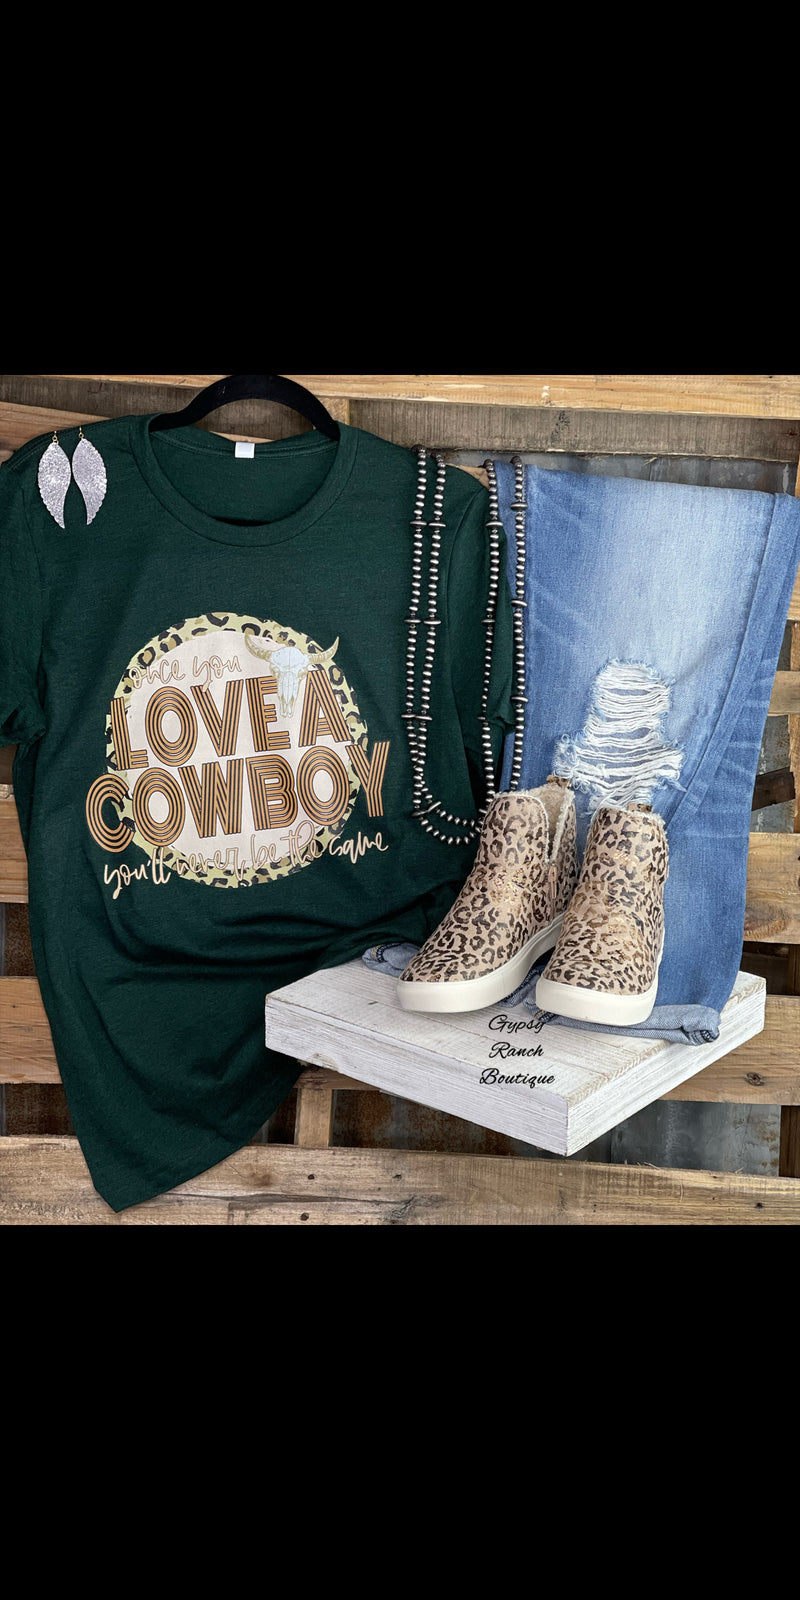 Once you Love a Cowboy Tee - Also in Plus Size